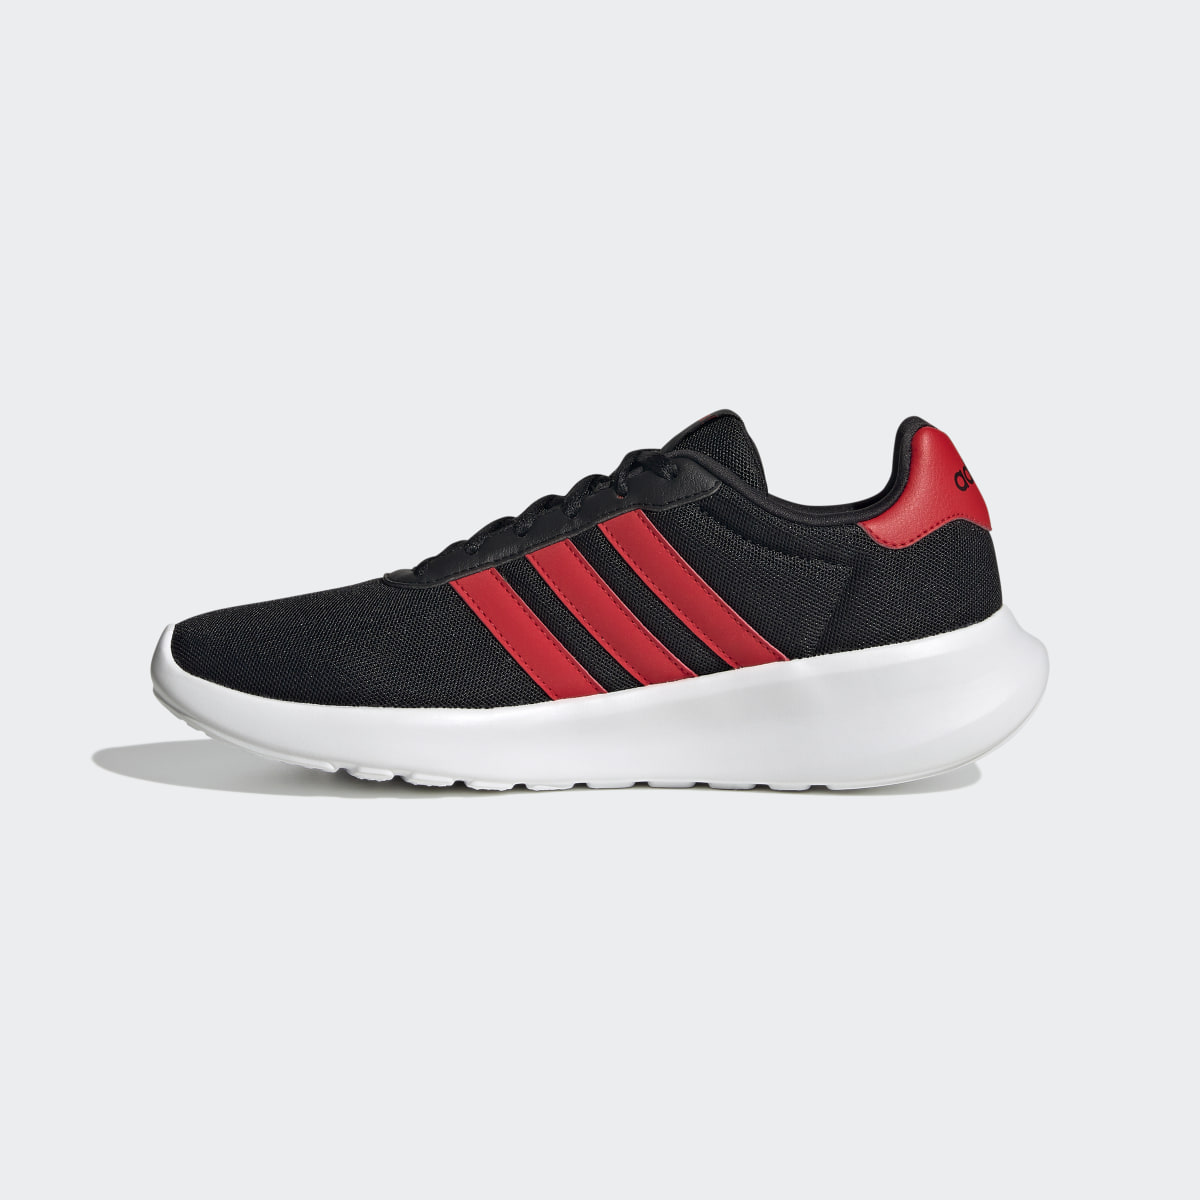 Adidas Lite Racer 3.0 Shoes. 7